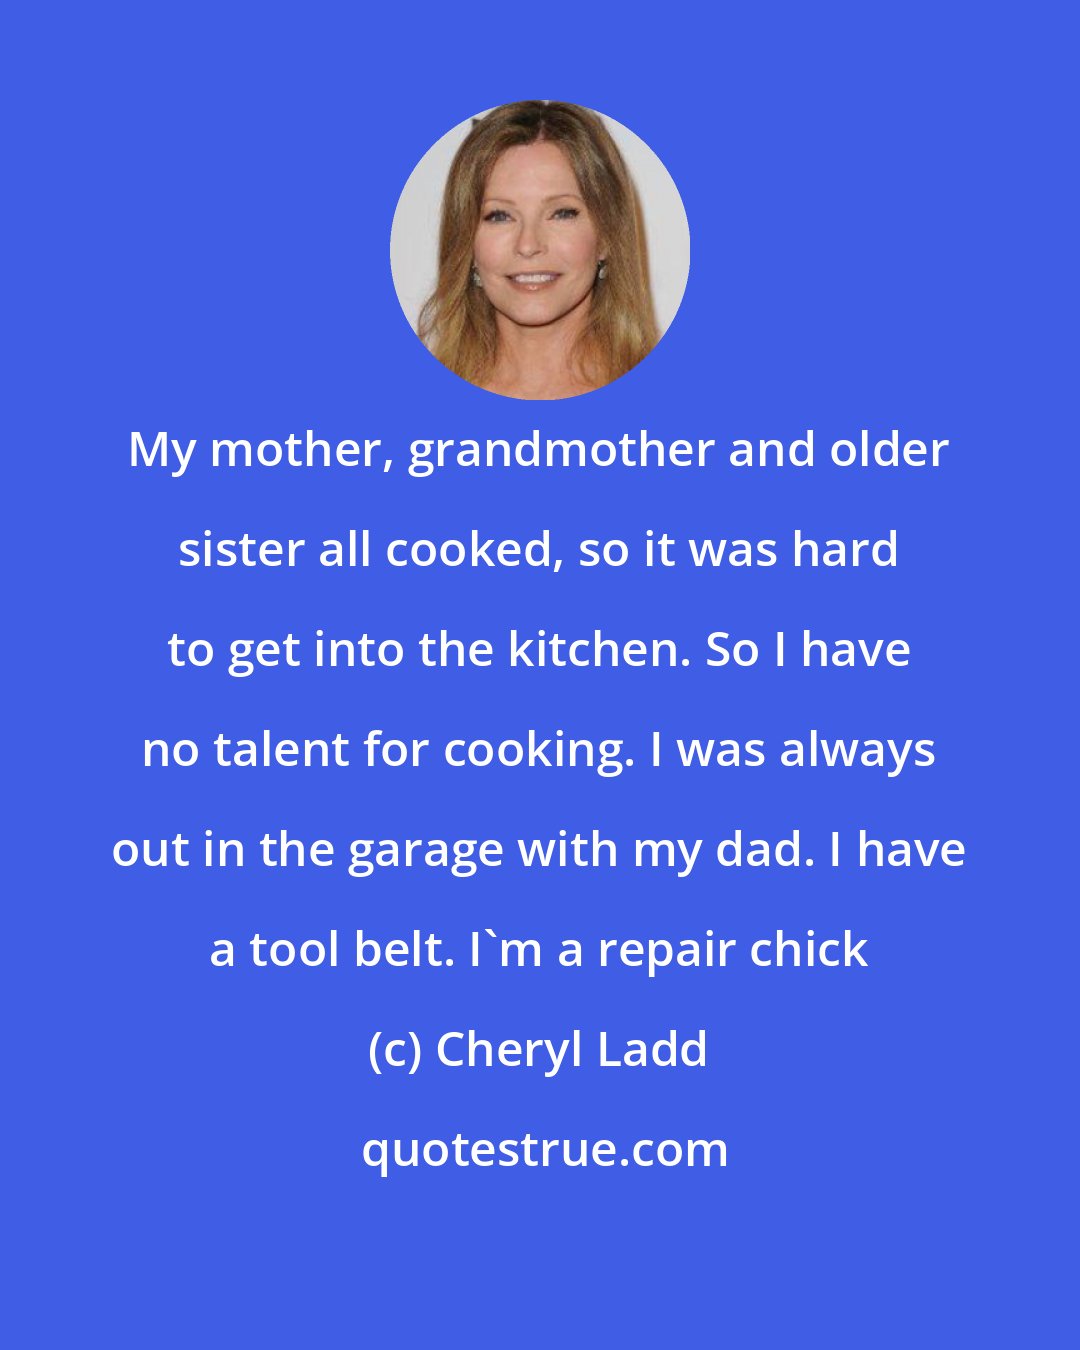 Cheryl Ladd: My mother, grandmother and older sister all cooked, so it was hard to get into the kitchen. So I have no talent for cooking. I was always out in the garage with my dad. I have a tool belt. I'm a repair chick